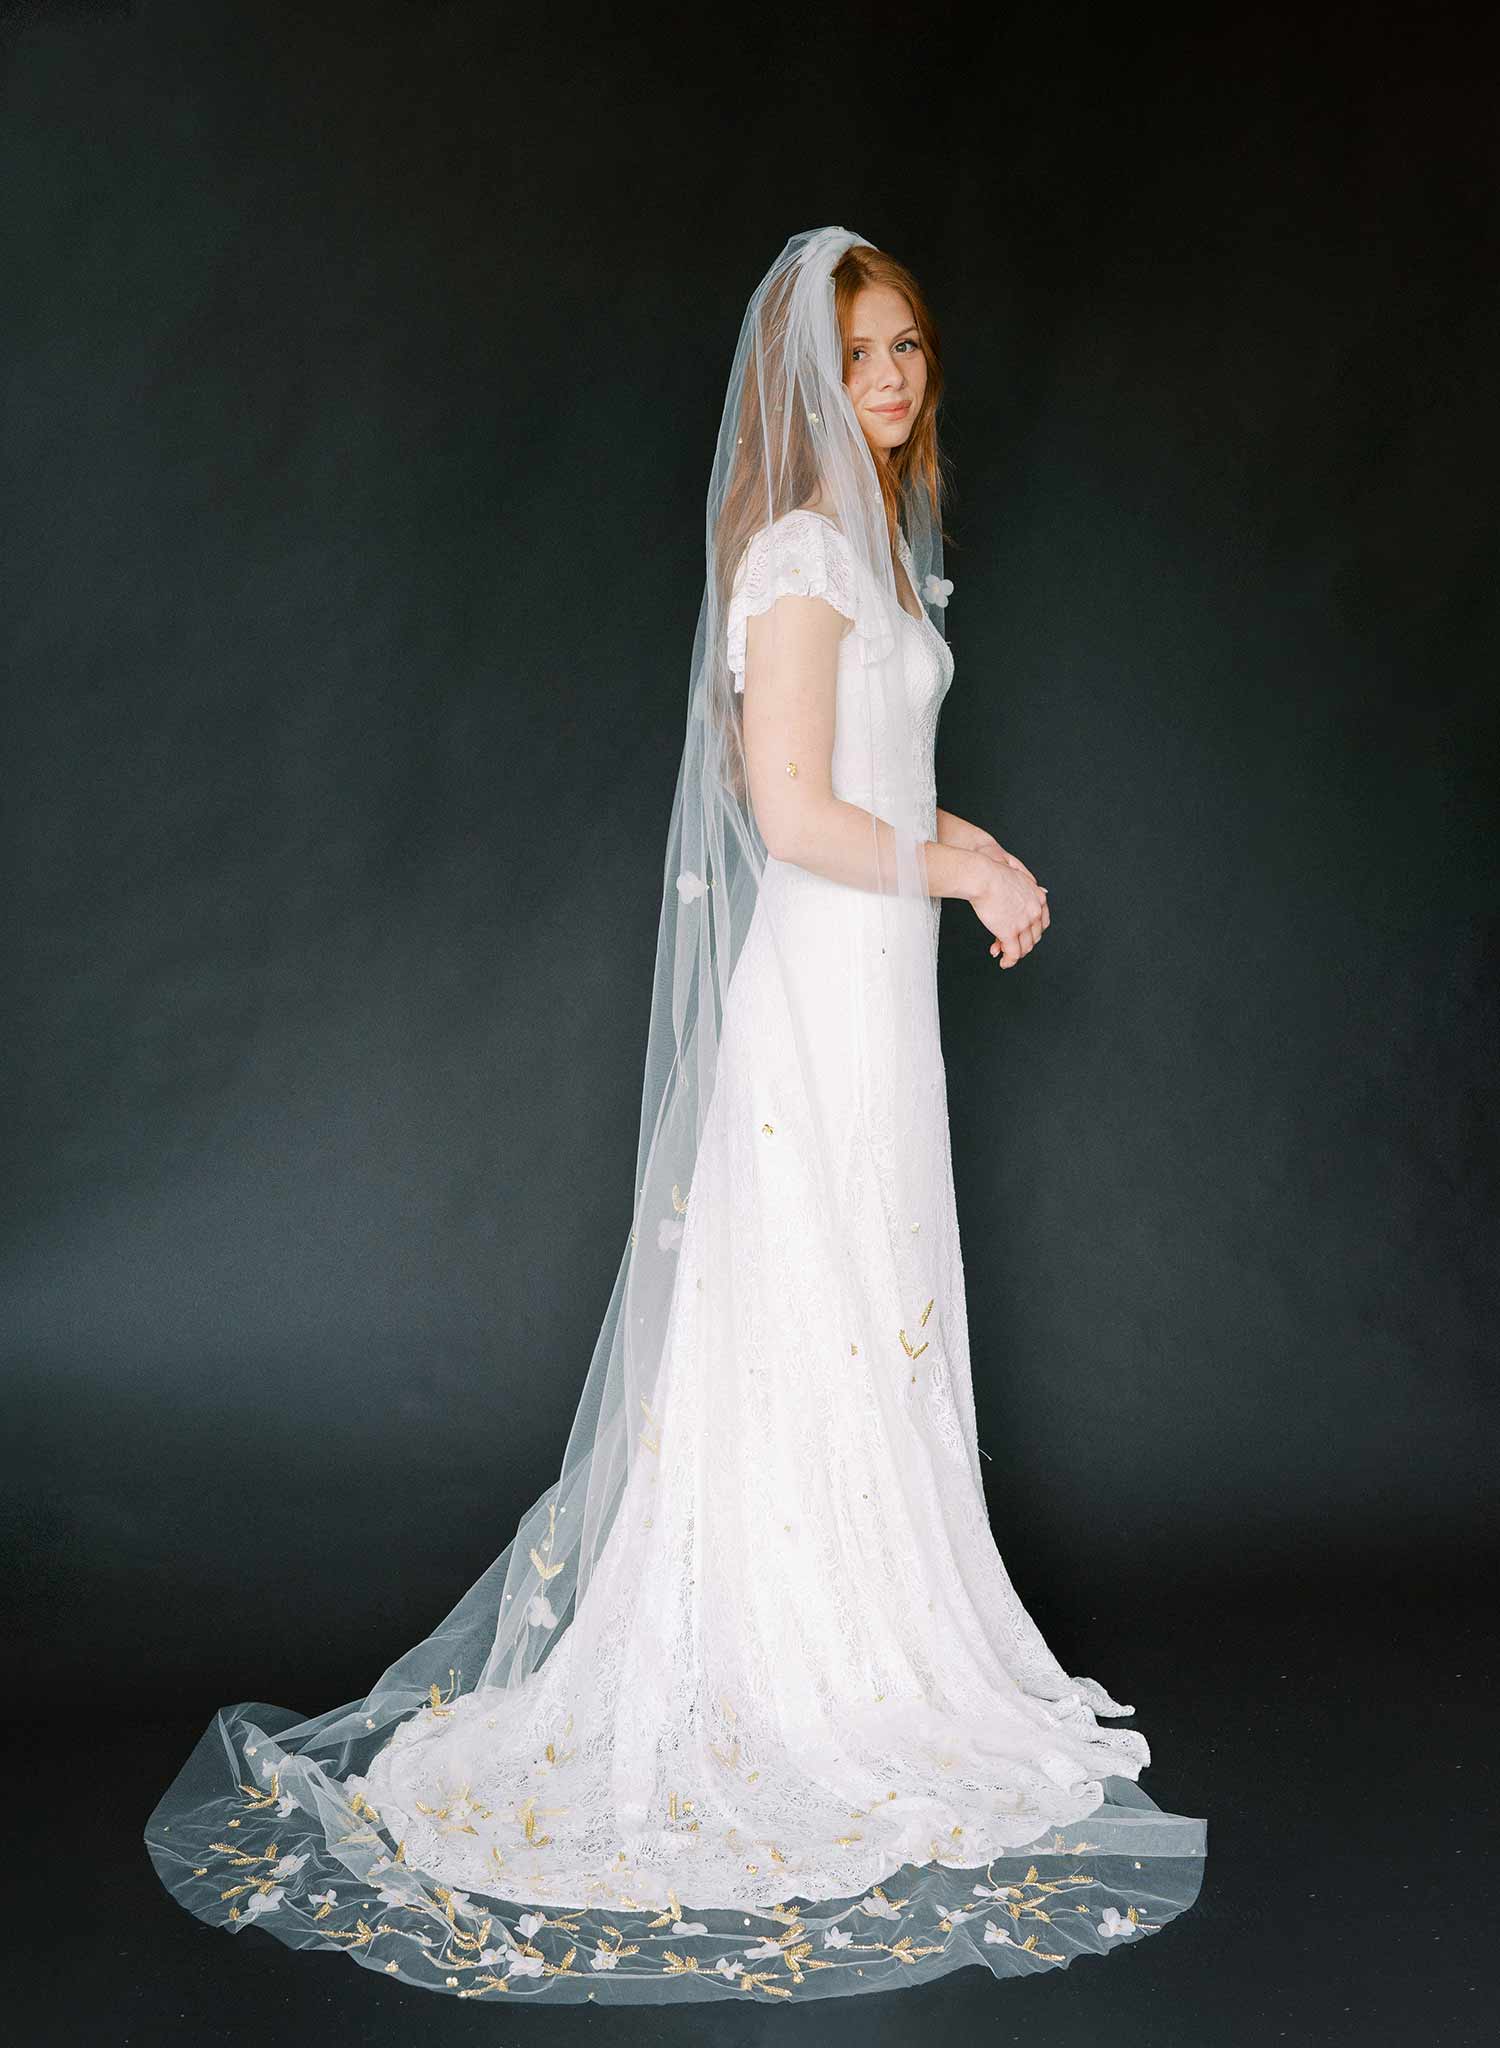 Floral embroidered bridal train veil, cathedral - Style #2367